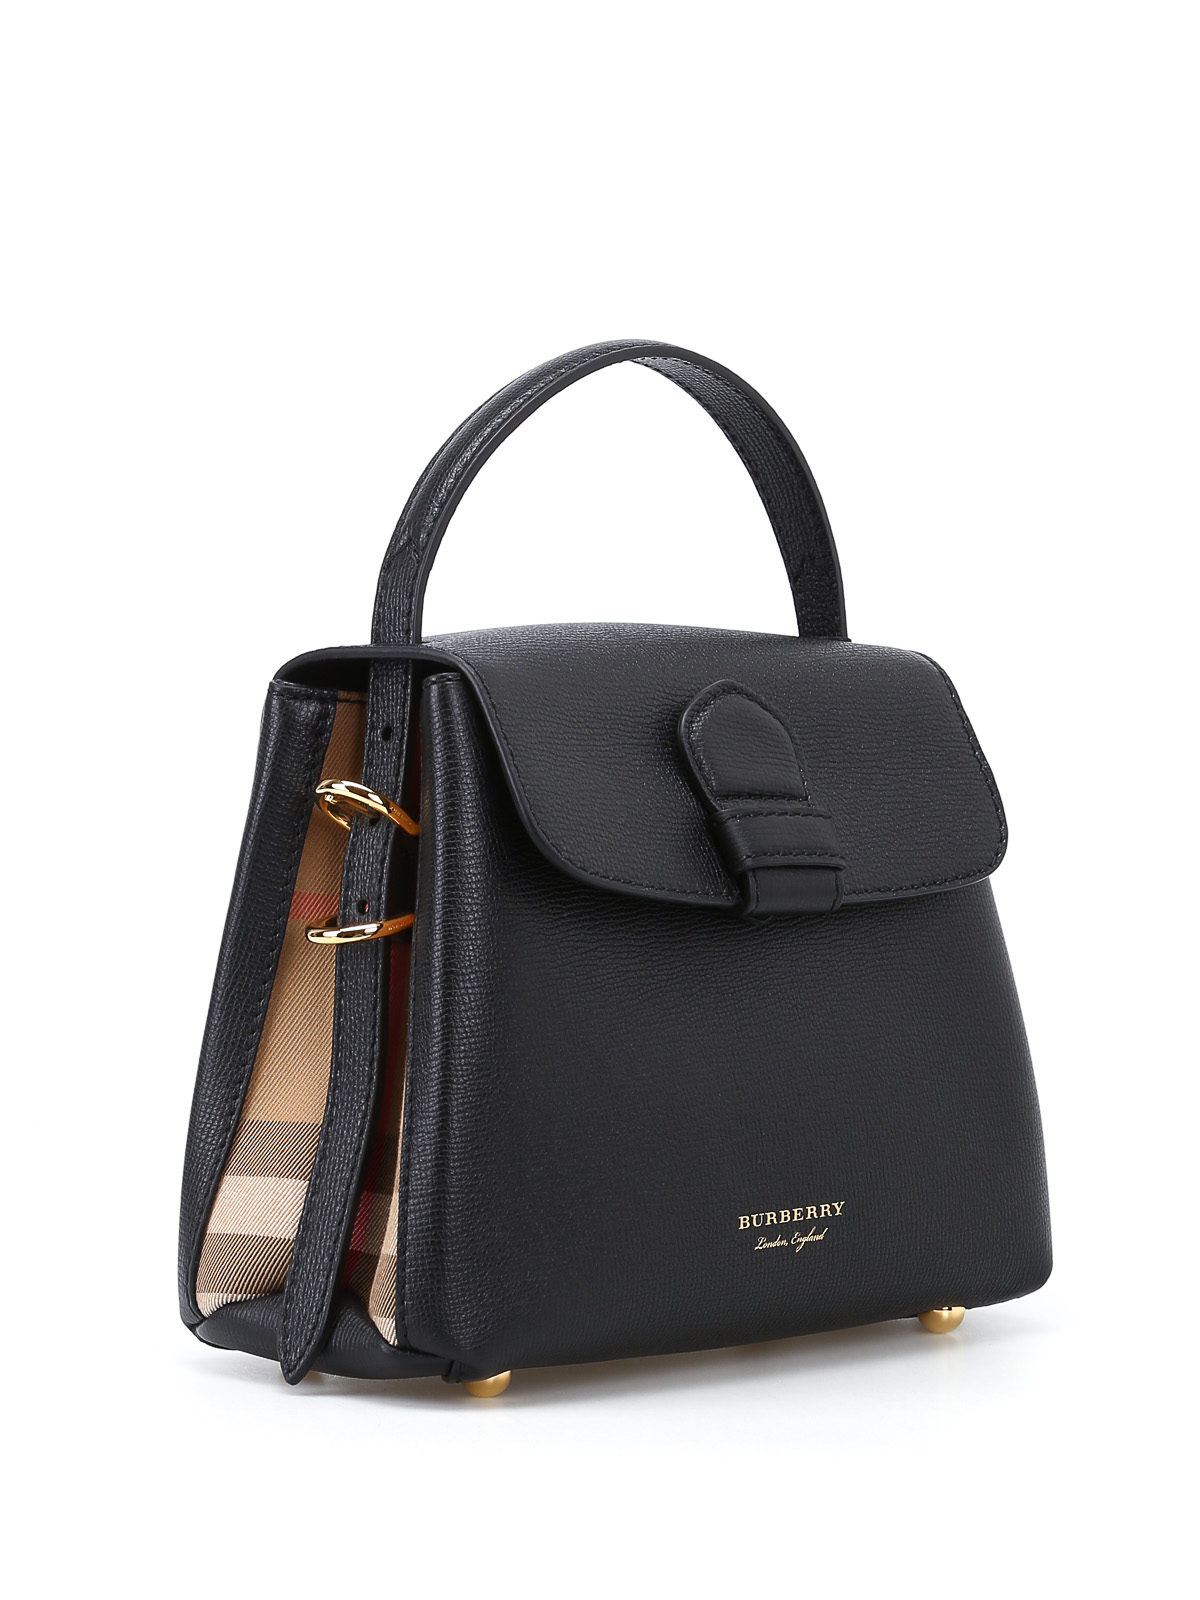 Burberry - Camberley small bowling bag 